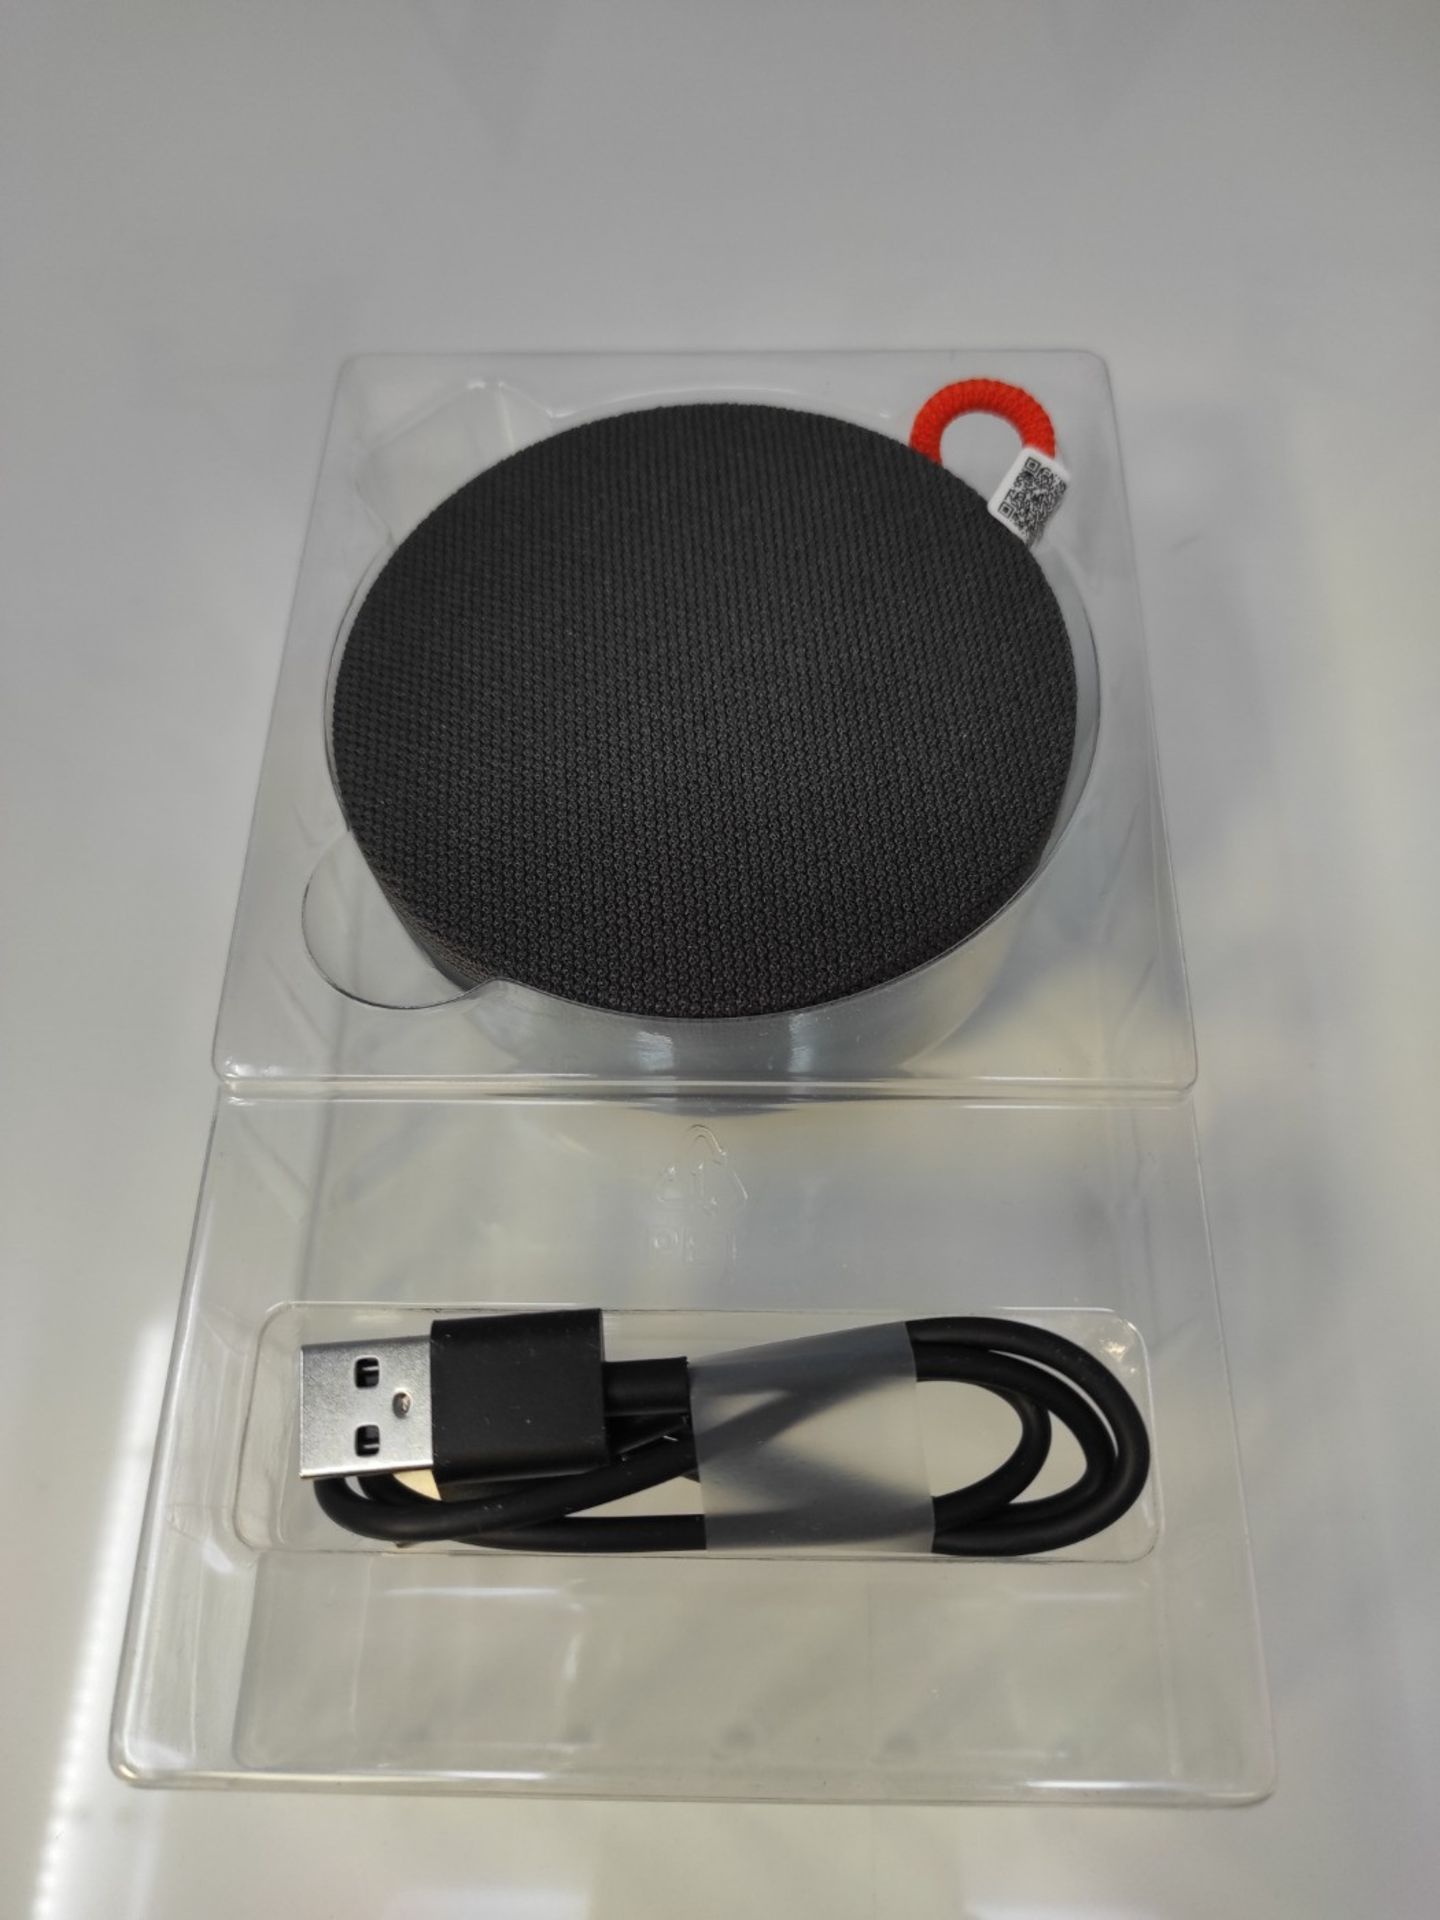 Xiaomi Mi Portable Speaker, Portable Speaker with Bluetooth Connection, Dustproof and - Image 3 of 6